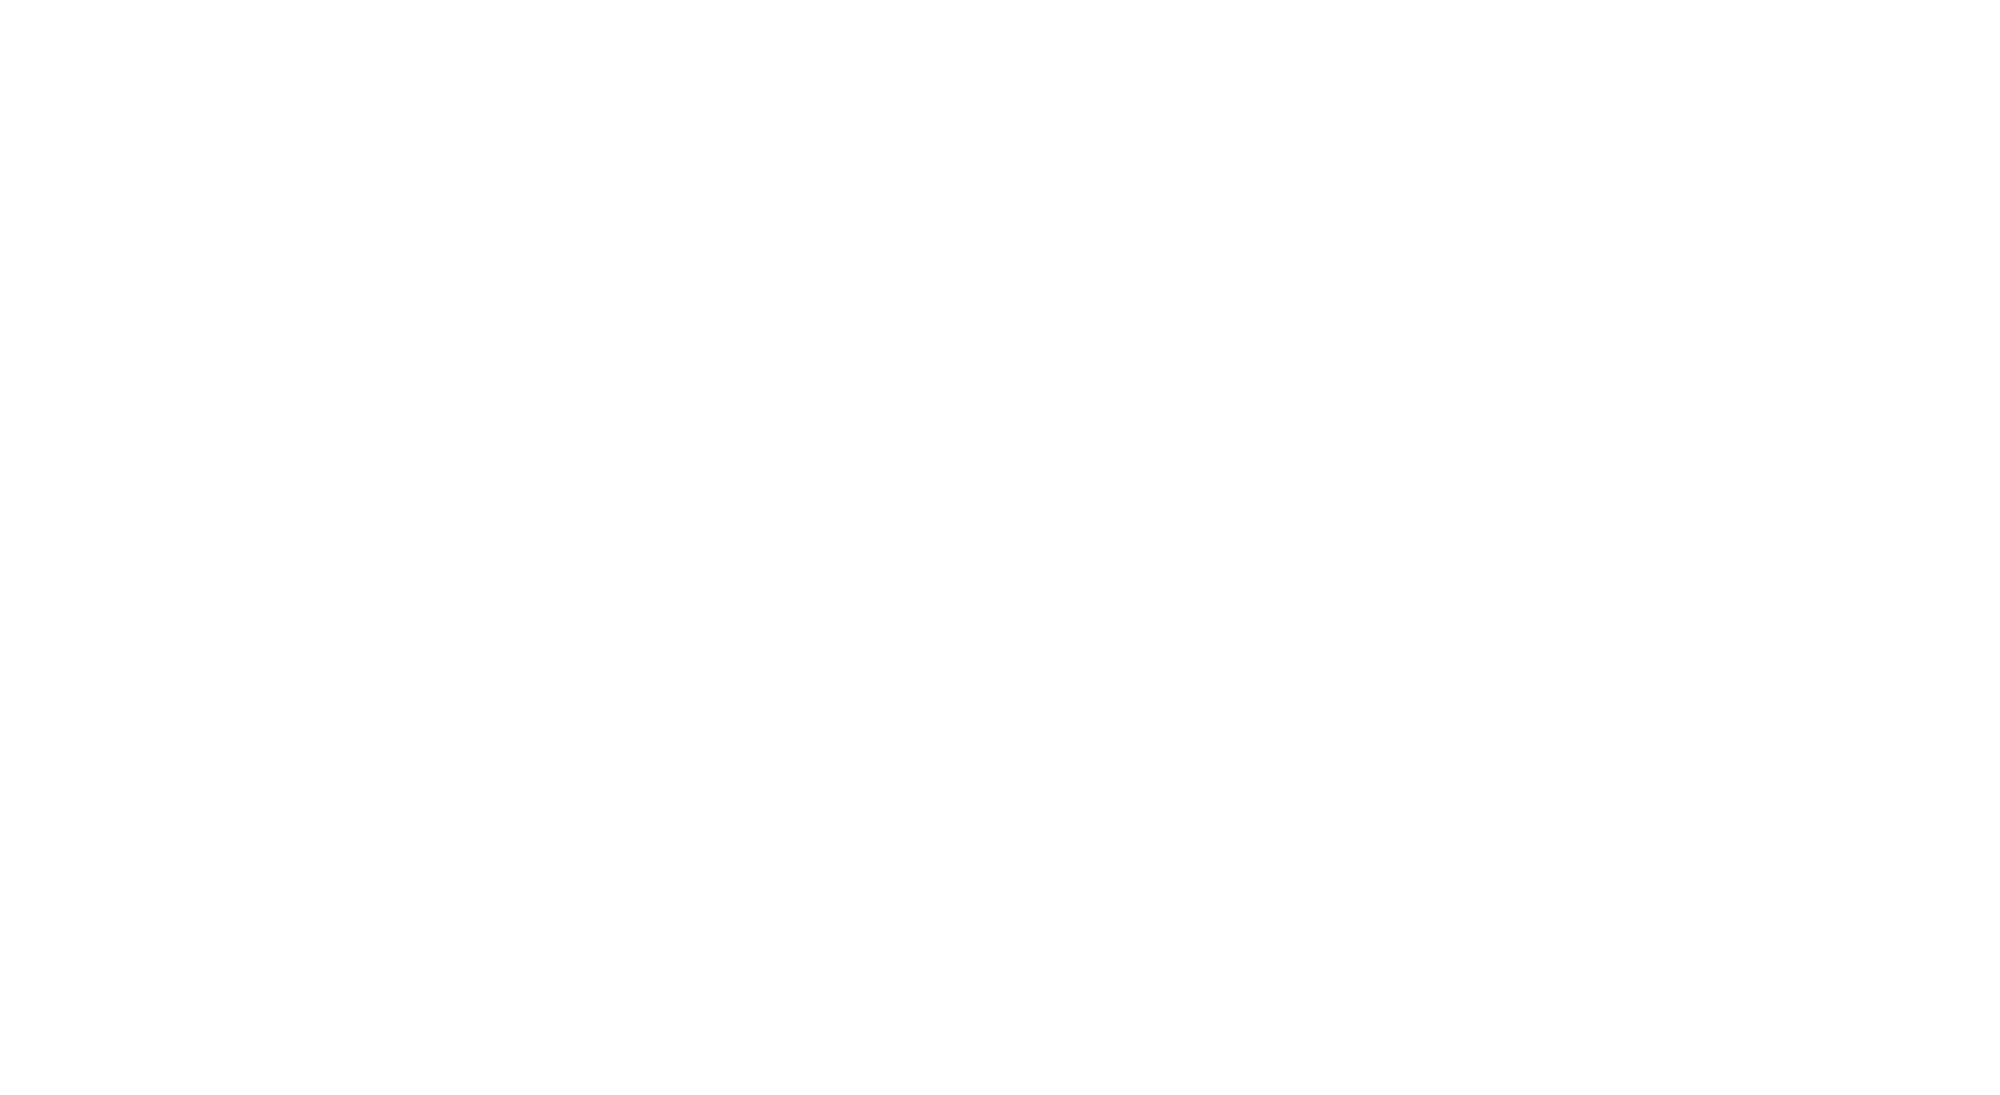 The Best of Both Worlds typography